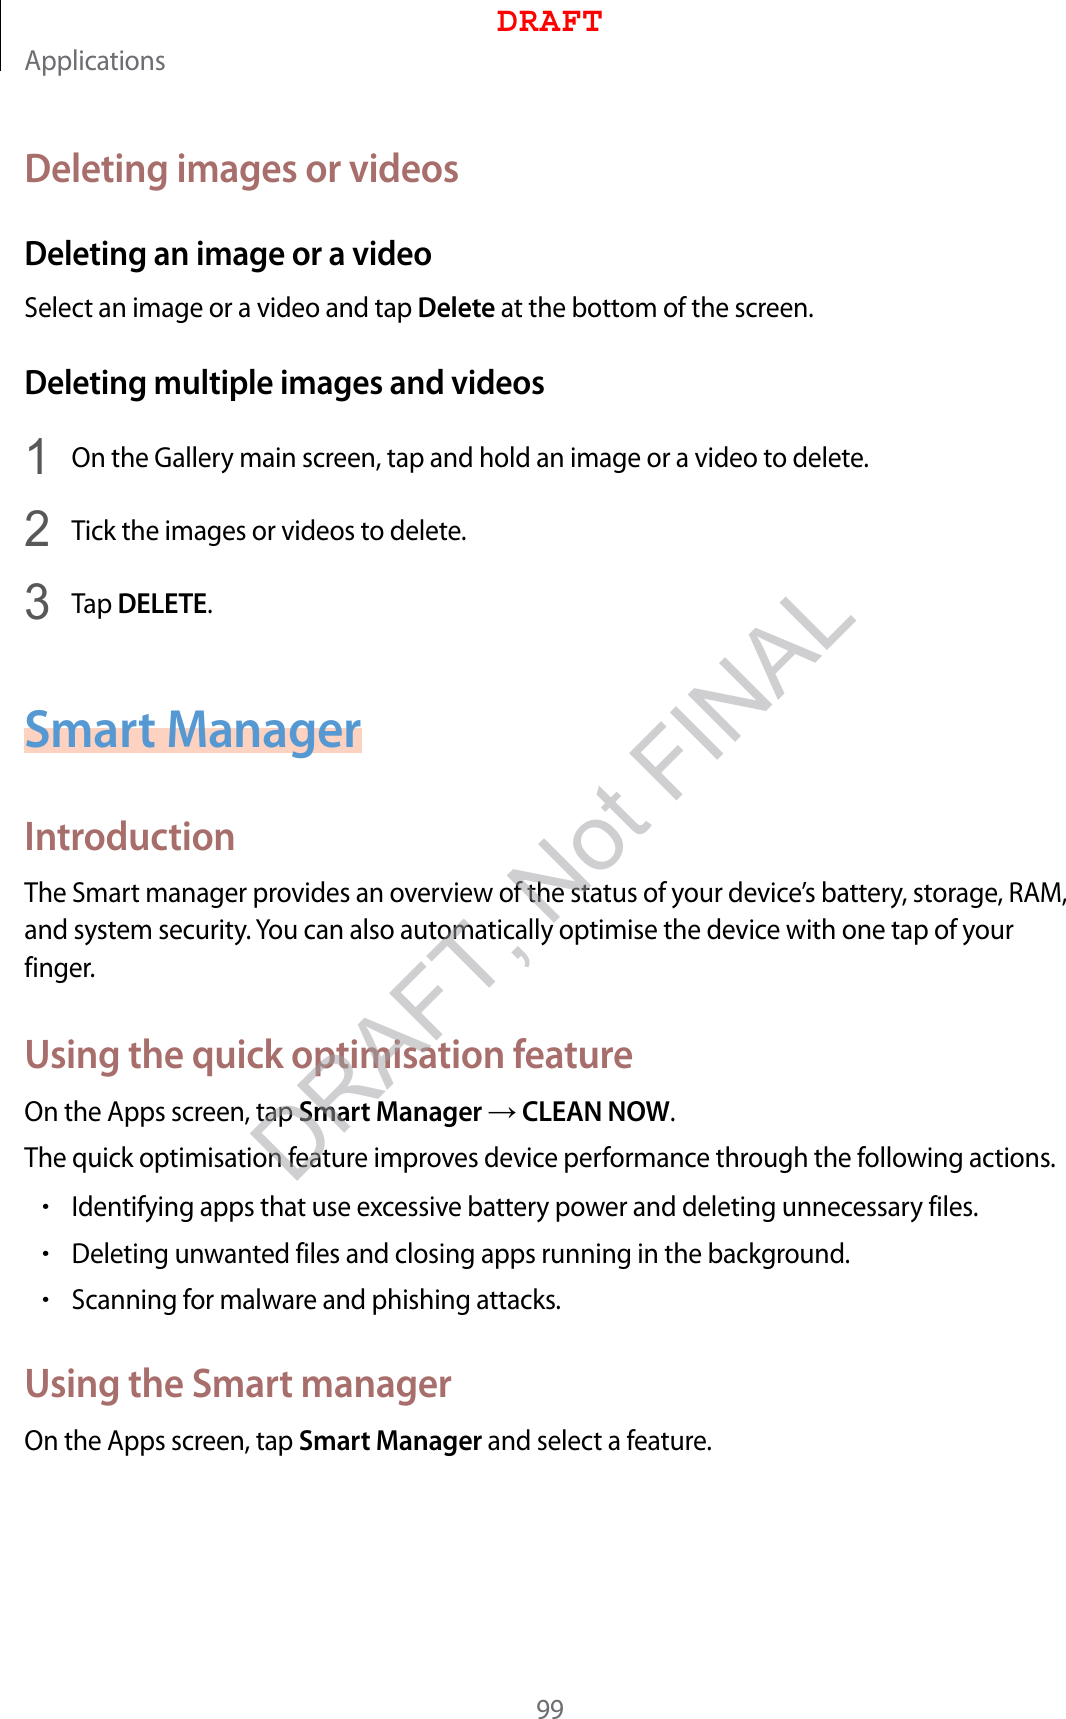 Applications99Deleting images or videosDeleting an image or a videoSelect an image or a video and tap Delete at the bottom of the screen.Deleting multiple images and videos1  On the Gallery main screen, tap and hold an image or a video to delete.2  Tick the images or videos to delete.3  Tap DELETE.Smart ManagerIntroductionThe Smart manager provides an overview of the status of your device’s battery, storage, RAM, and system security. You can also automatically optimise the device with one tap of your finger.Using the quick optimisation featureOn the Apps screen, tap Smart Manager  CLEAN NOW.The quick optimisation feature improves device performance through the following actions.•Identifying apps that use excessive battery power and deleting unnecessary files.•Deleting unwanted files and closing apps running in the background.•Scanning for malware and phishing attacks.Using the Smart managerOn the Apps screen, tap Smart Manager and select a feature.DRAFTDRAFT, Not FINAL